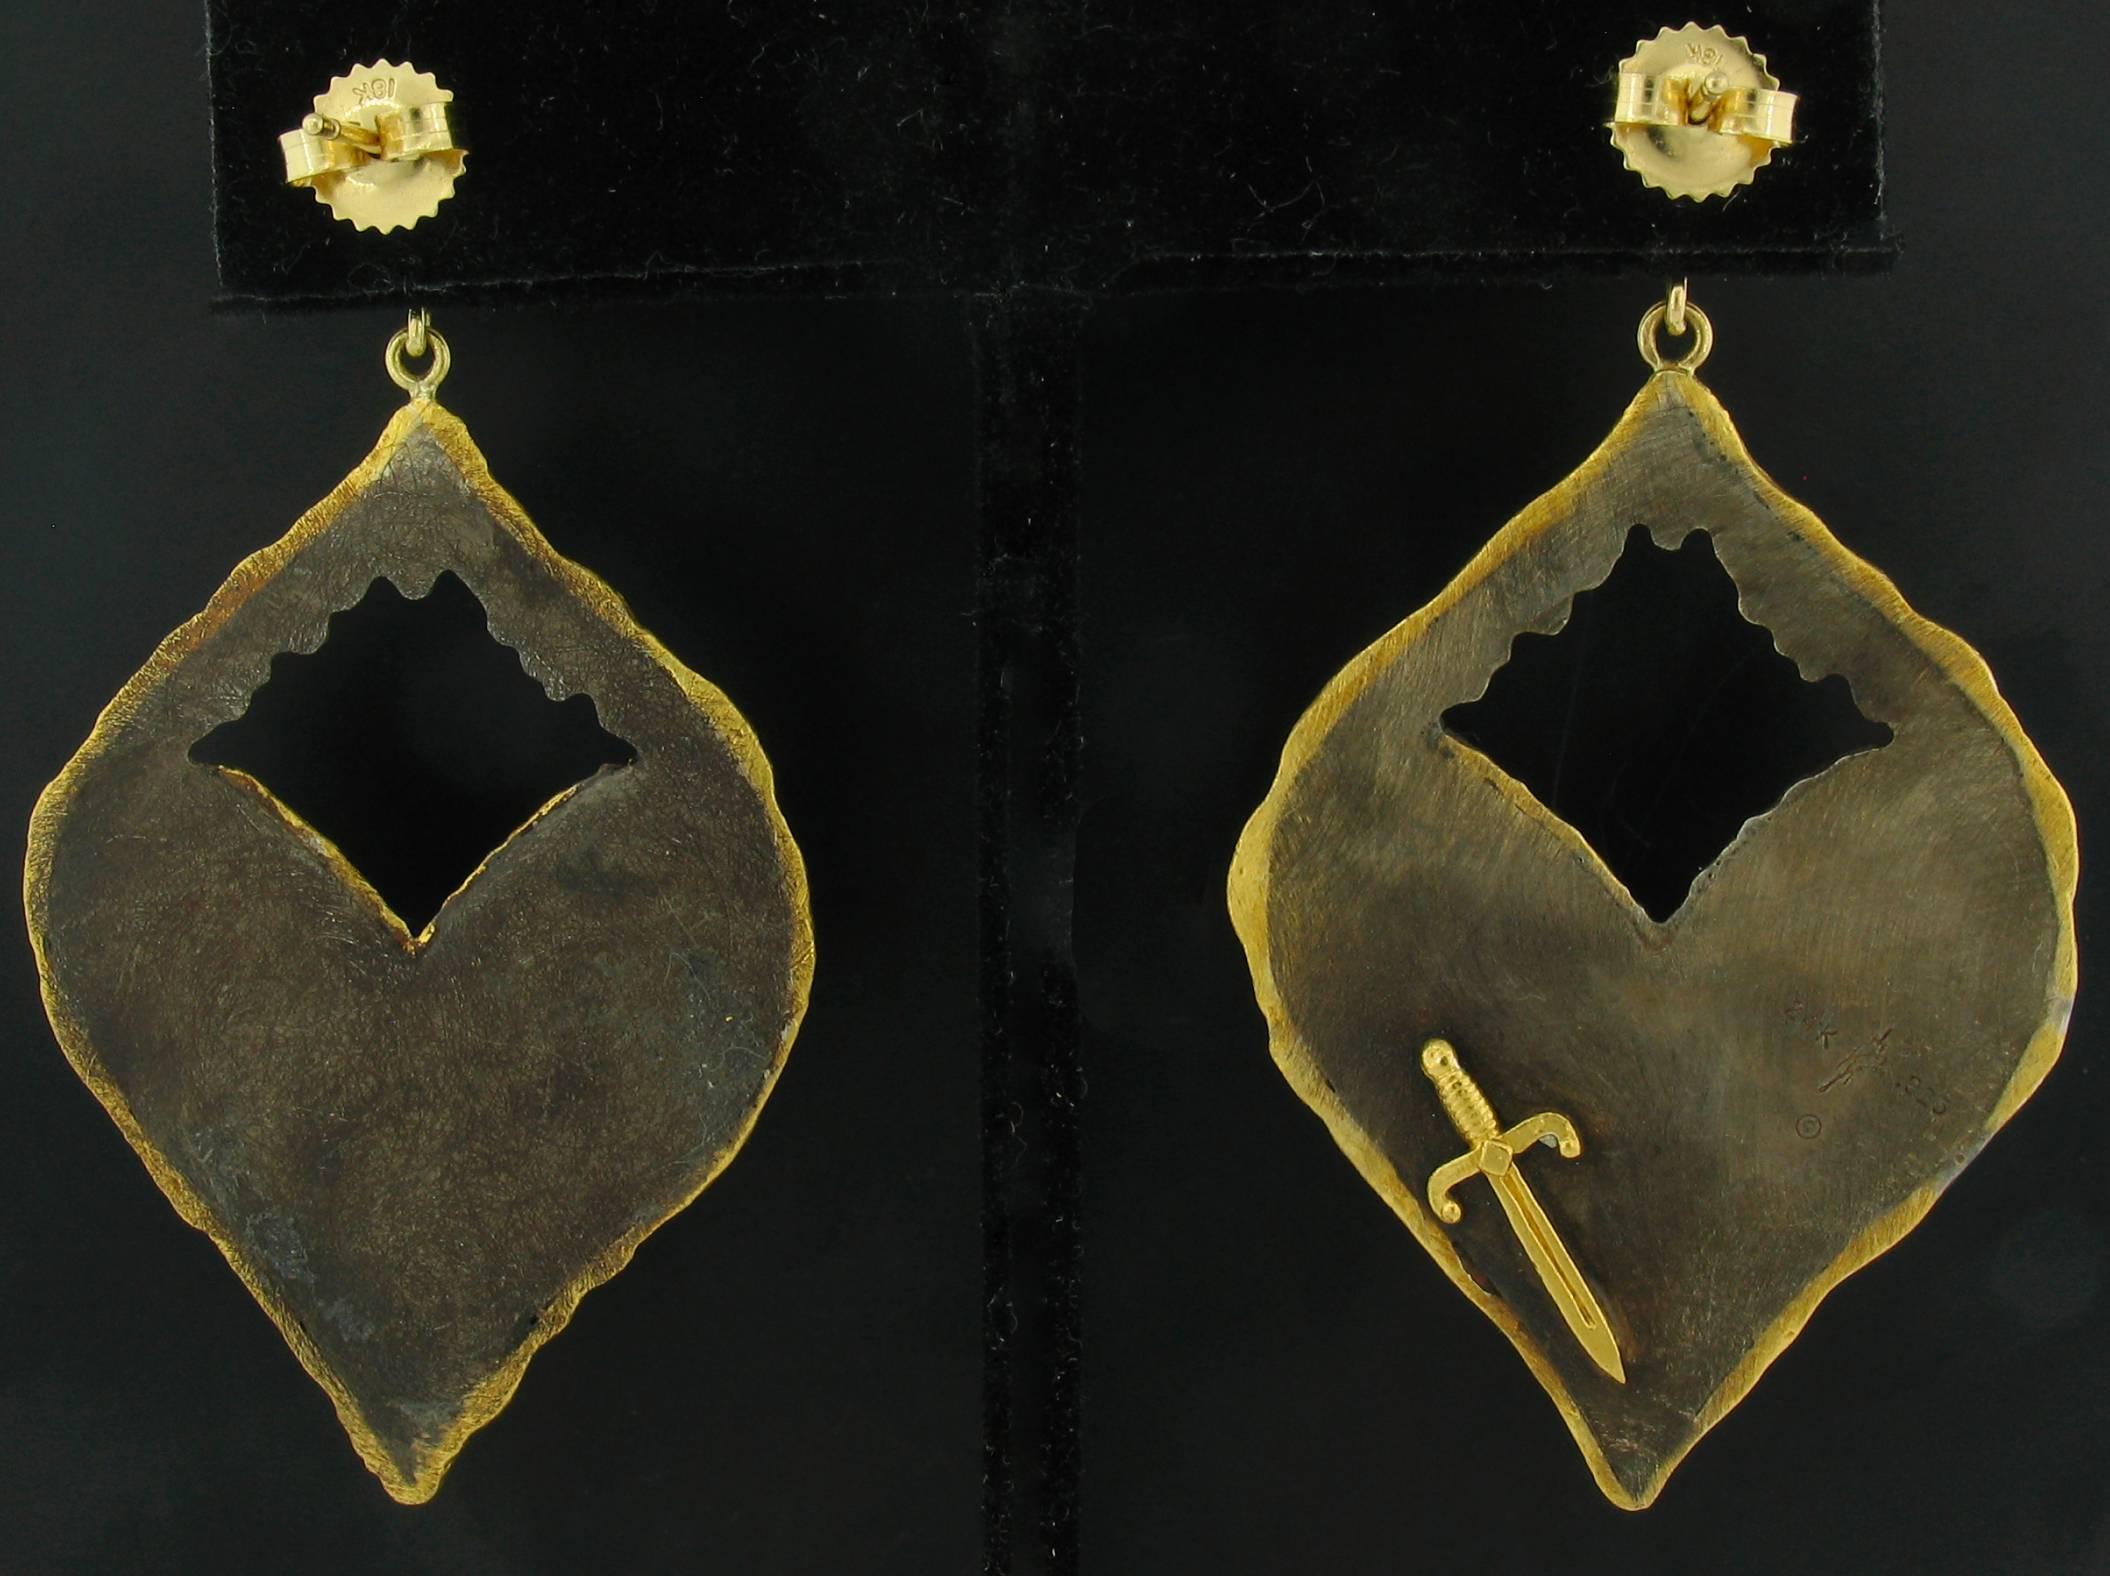 These Earrings were designed and made by well known designer Victor Velyan.   They contain Diamonds weighing a total of 0.53 carats.  They are made of a base of pure Silver with all accent work created in 24k yellow Gold.  The 'brown' is a